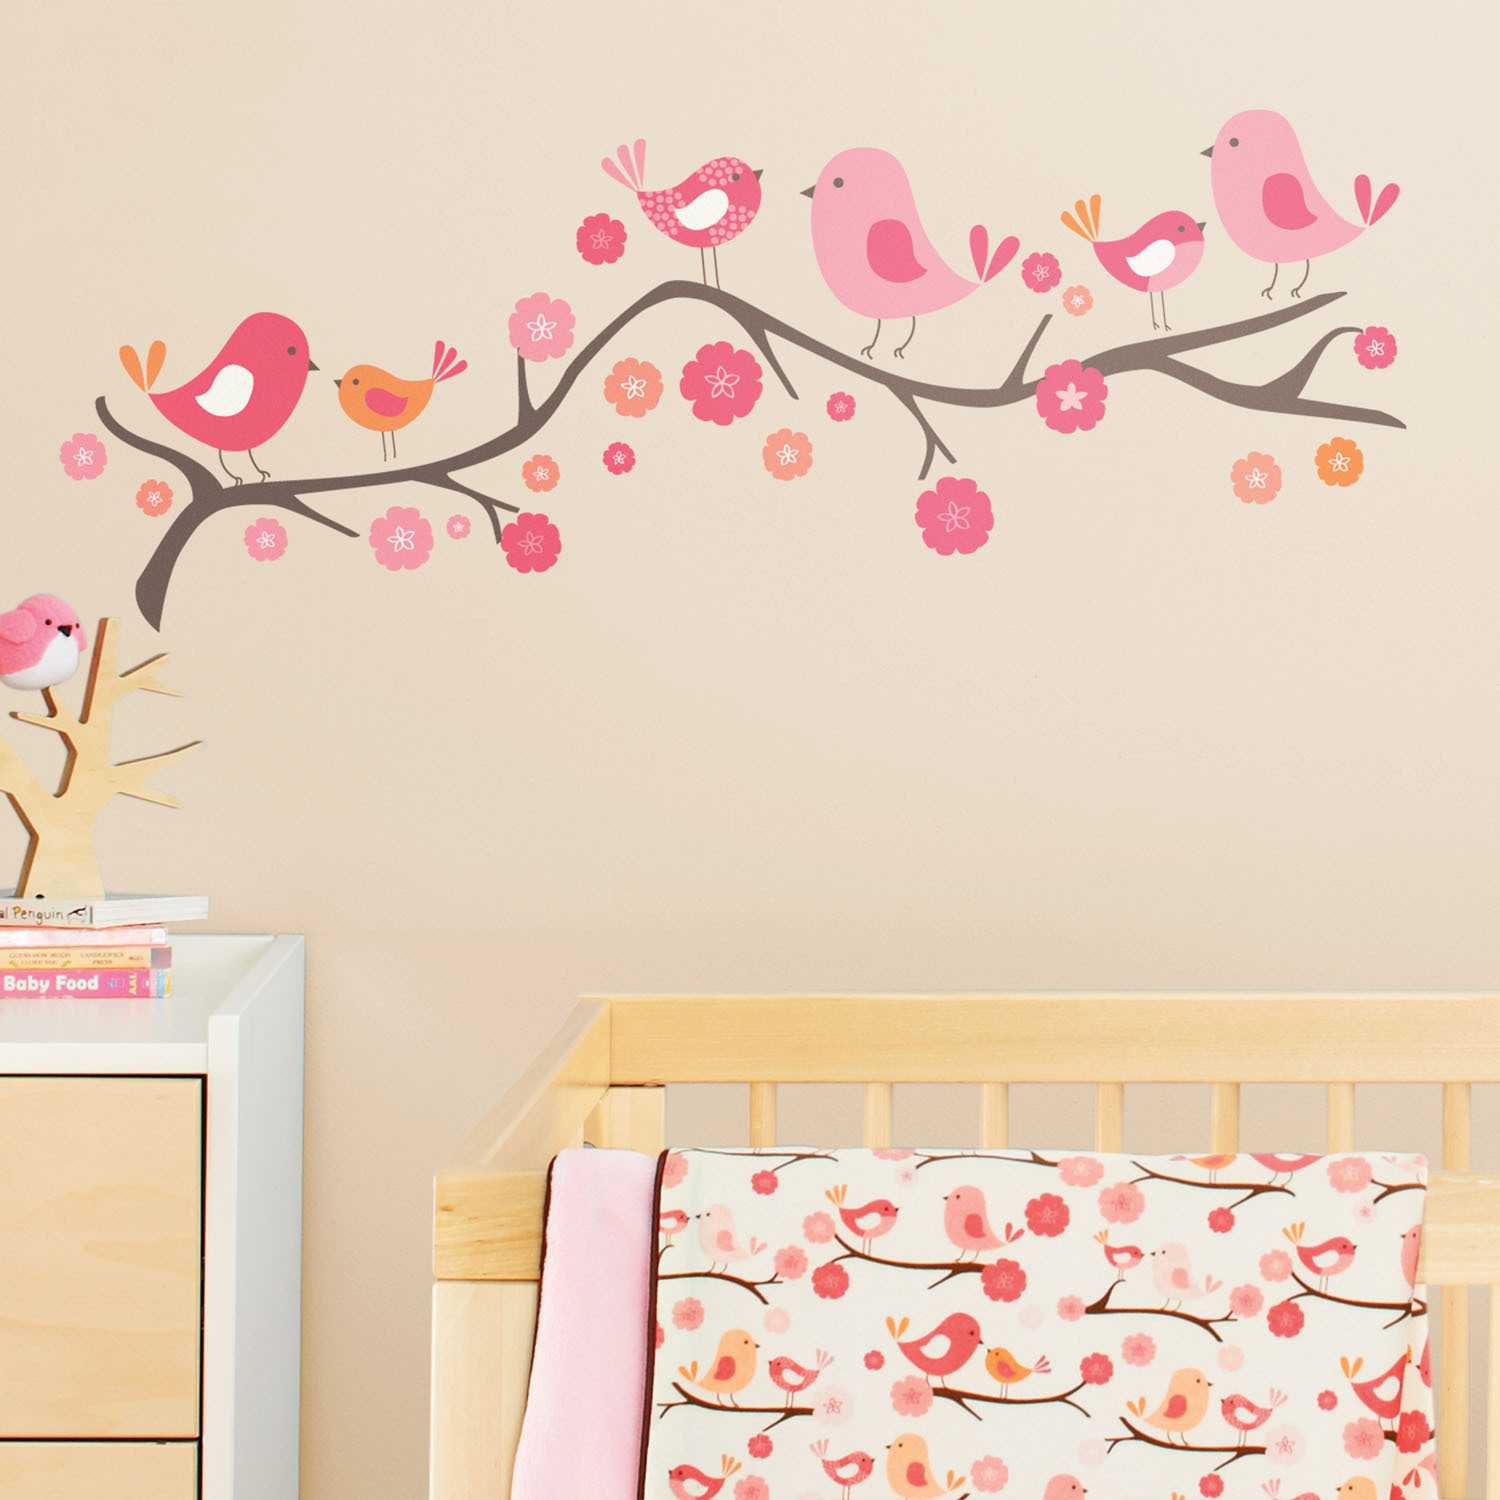 the idea of ​​chic decorating a nursery